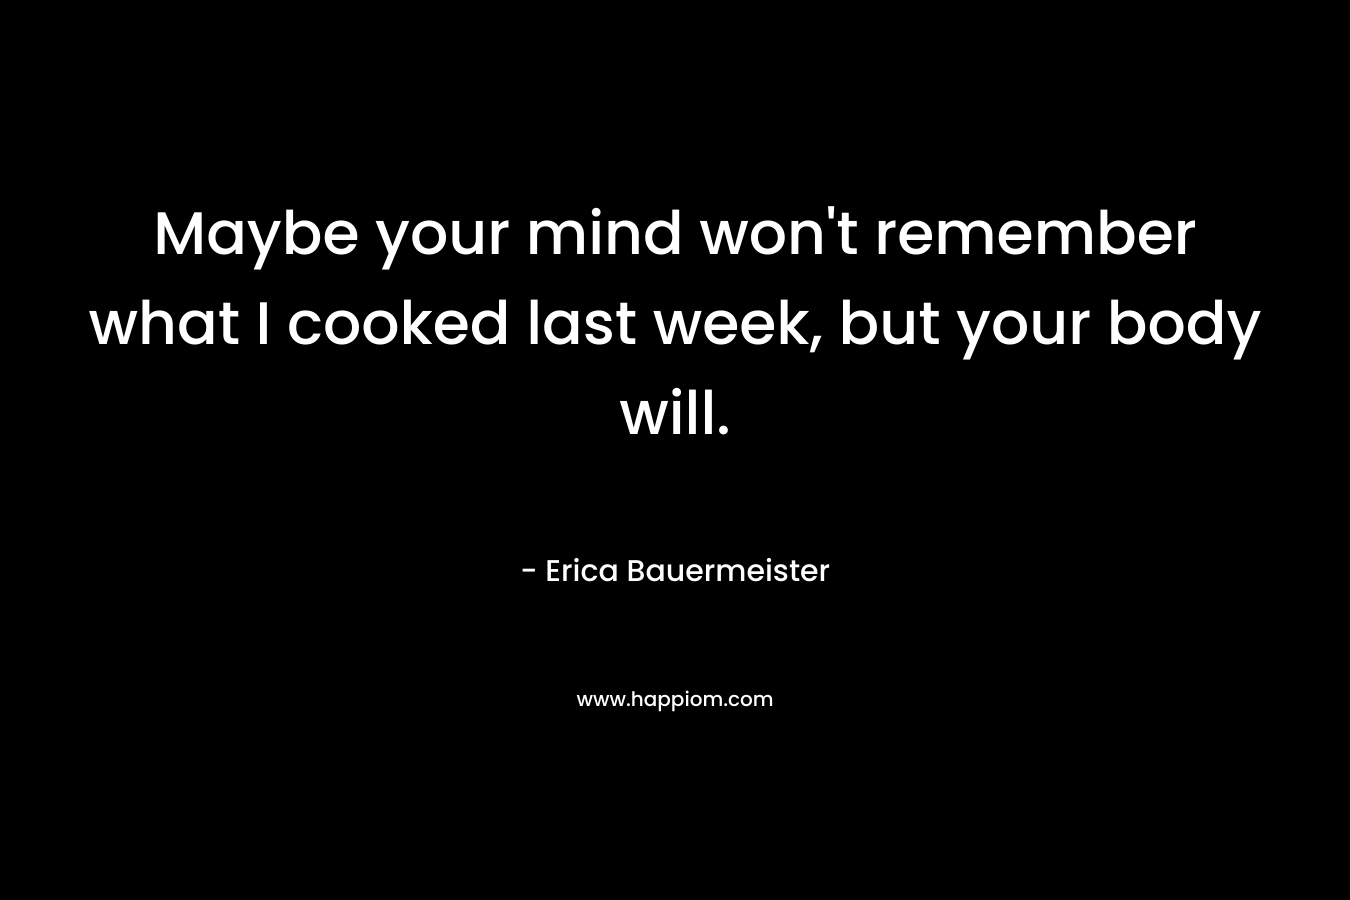 Maybe your mind won’t remember what I cooked last week, but your body will. – Erica Bauermeister